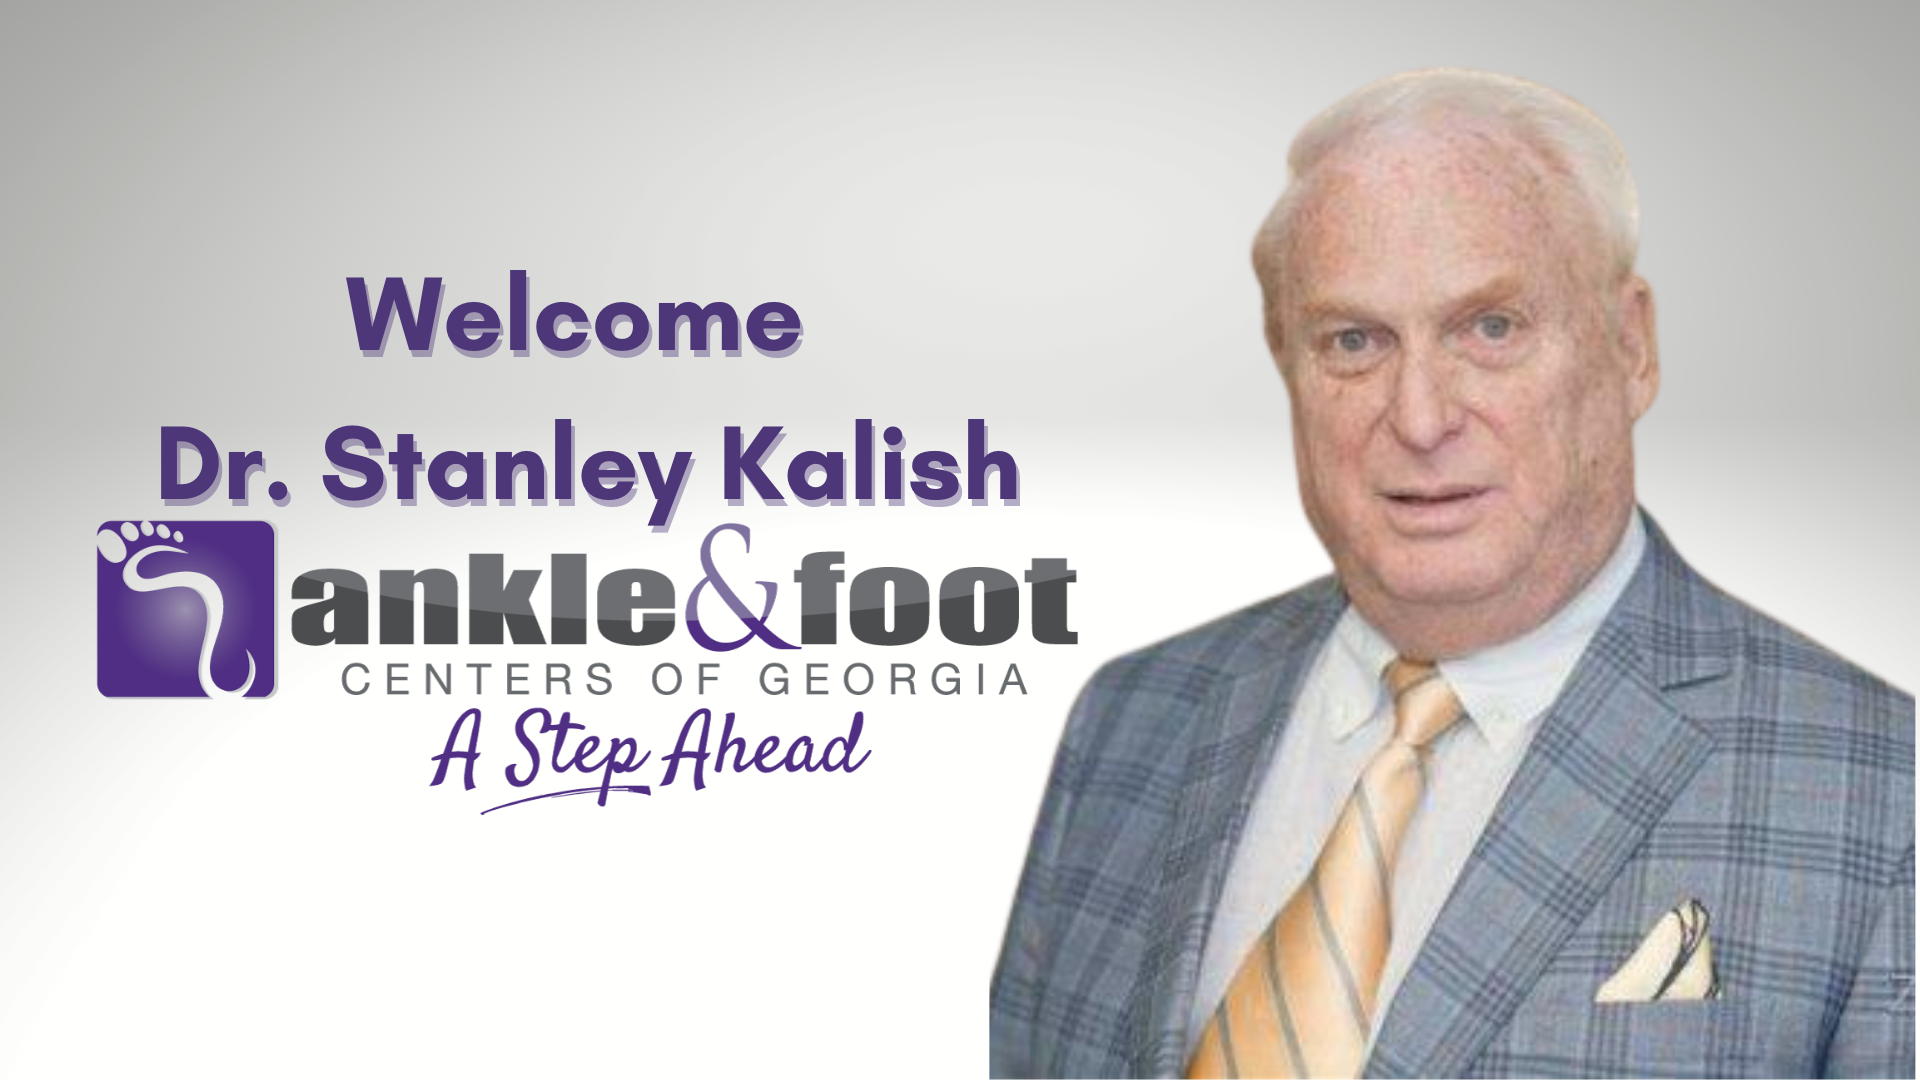 Dr. Stanley Kalish joins Ankle & Foot Centers of Georgia